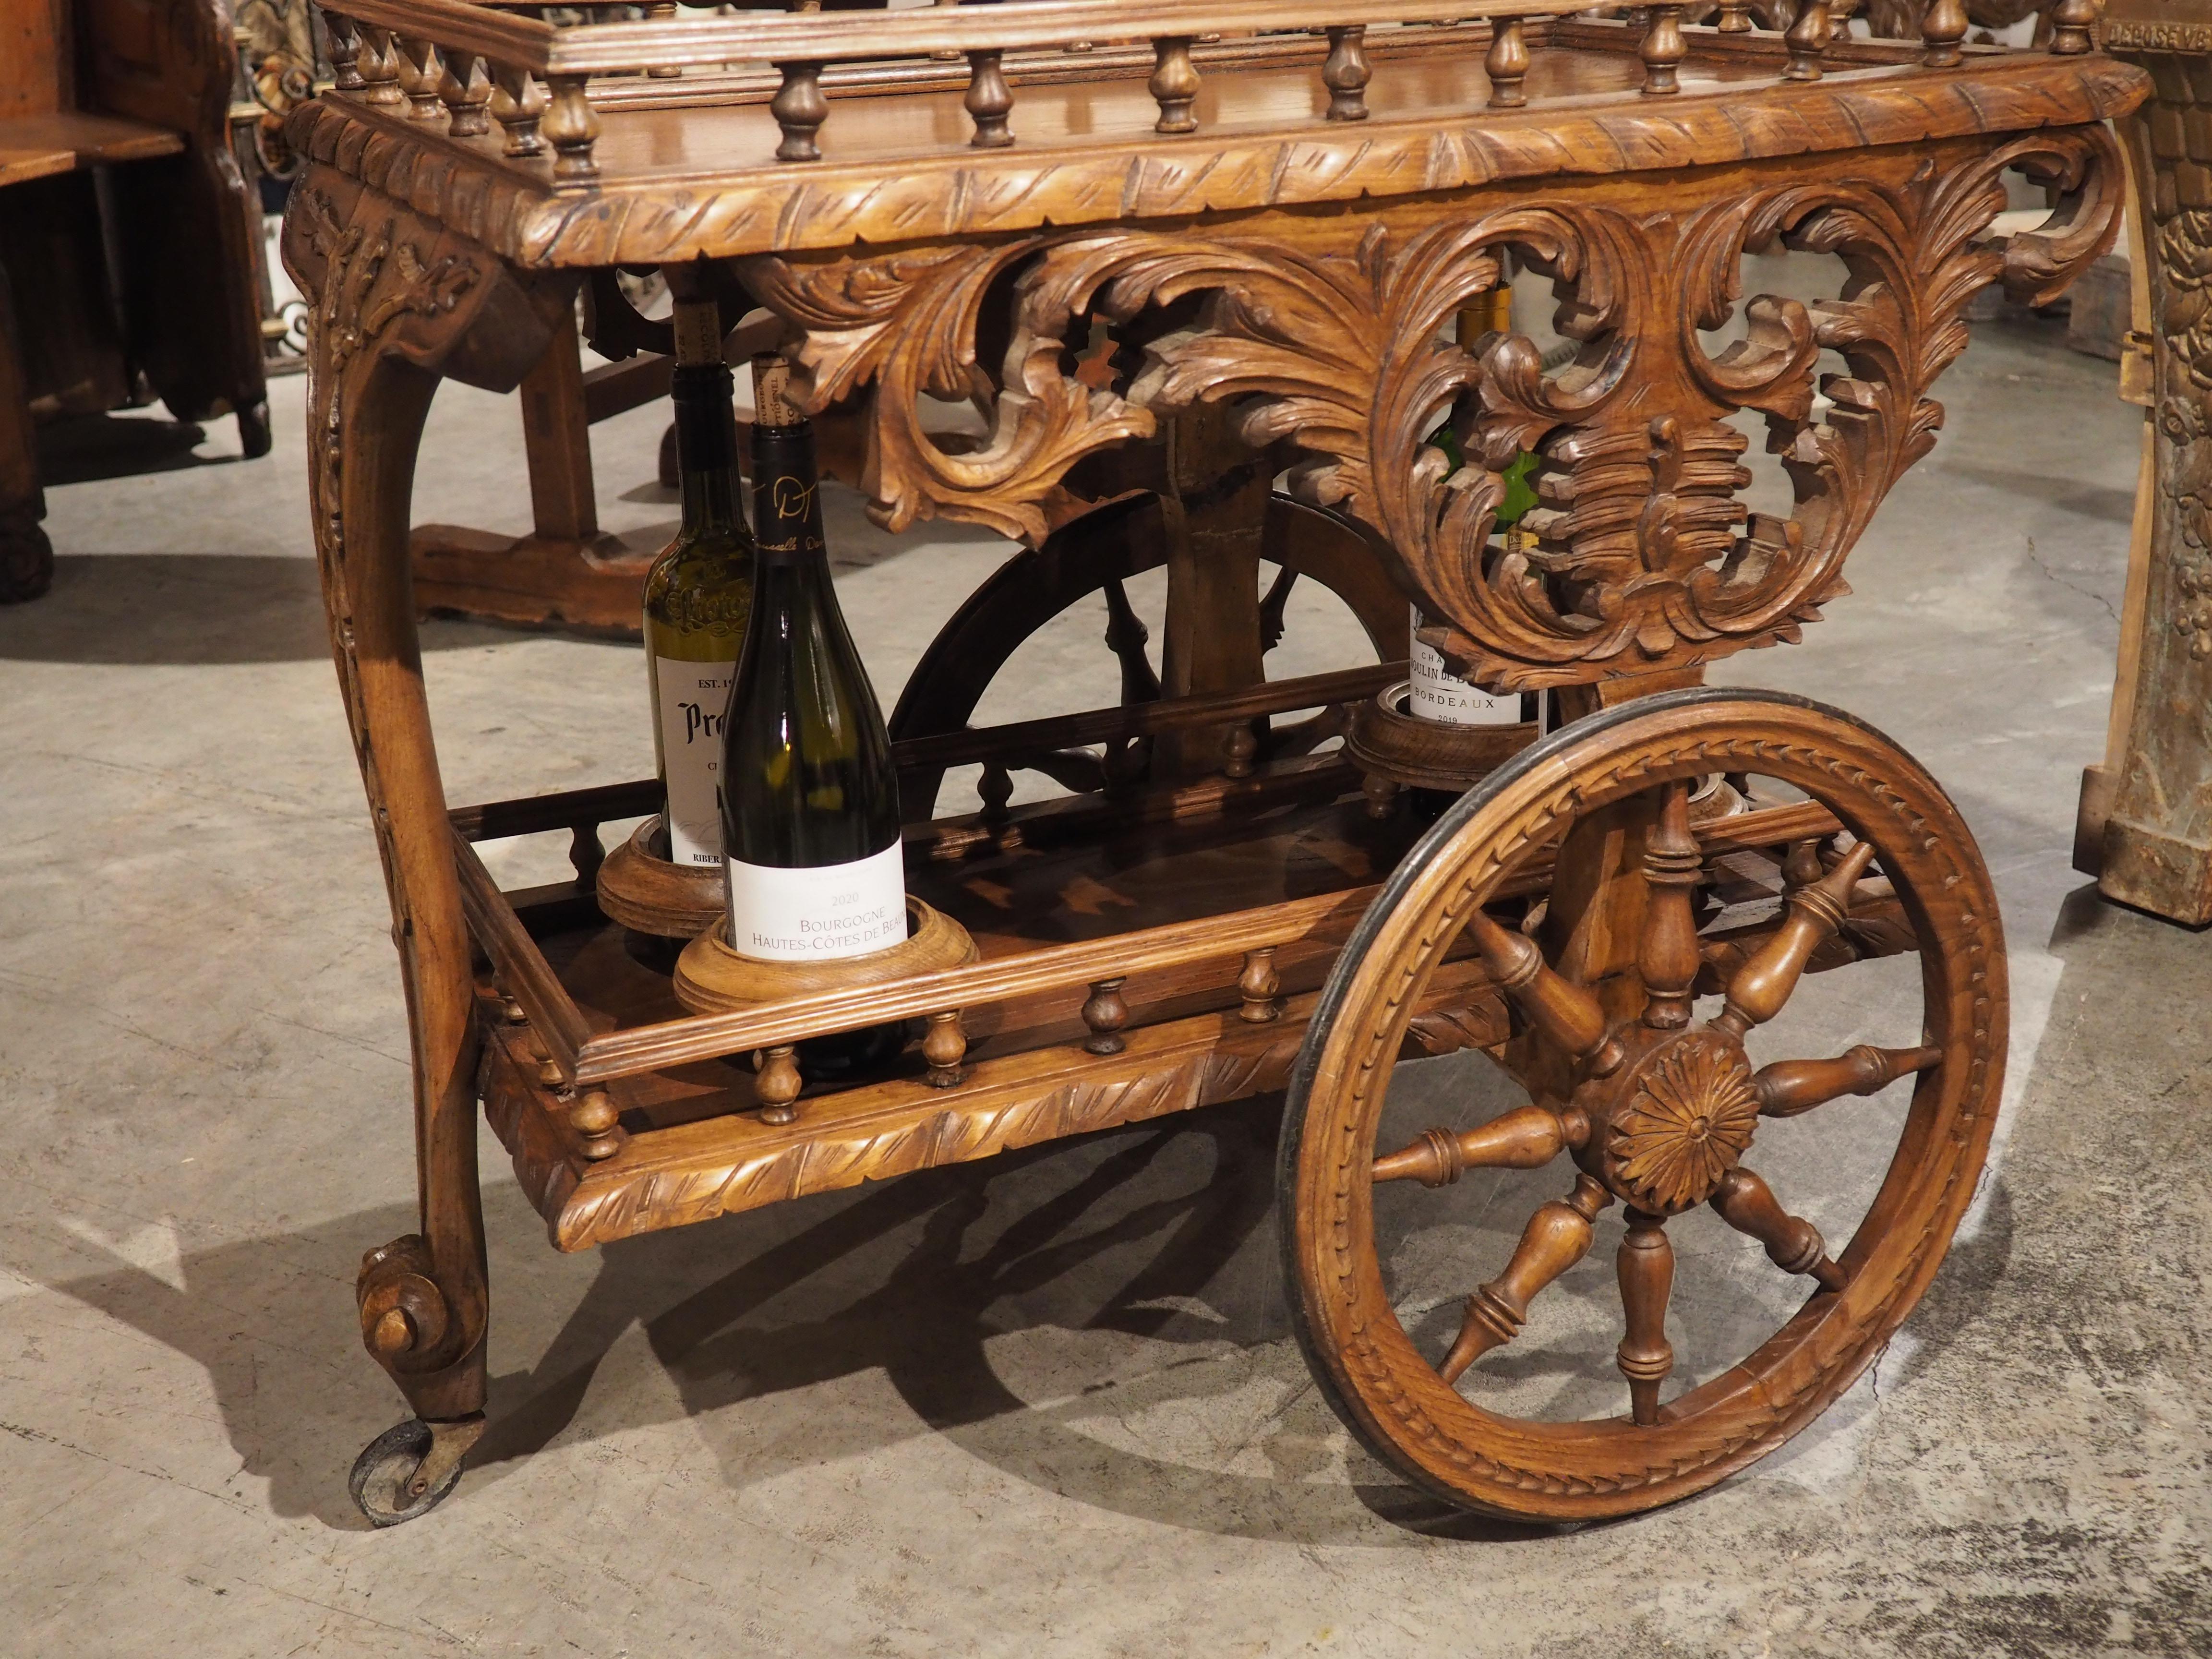 An unusual beverage table from Brittany, France, this bar cart was designed for the utmost portability, traversing via a pair of 16-inch wooden wheels. Typically, bar carts of this age (early 1900s), would be crafted from metal, namely brass or